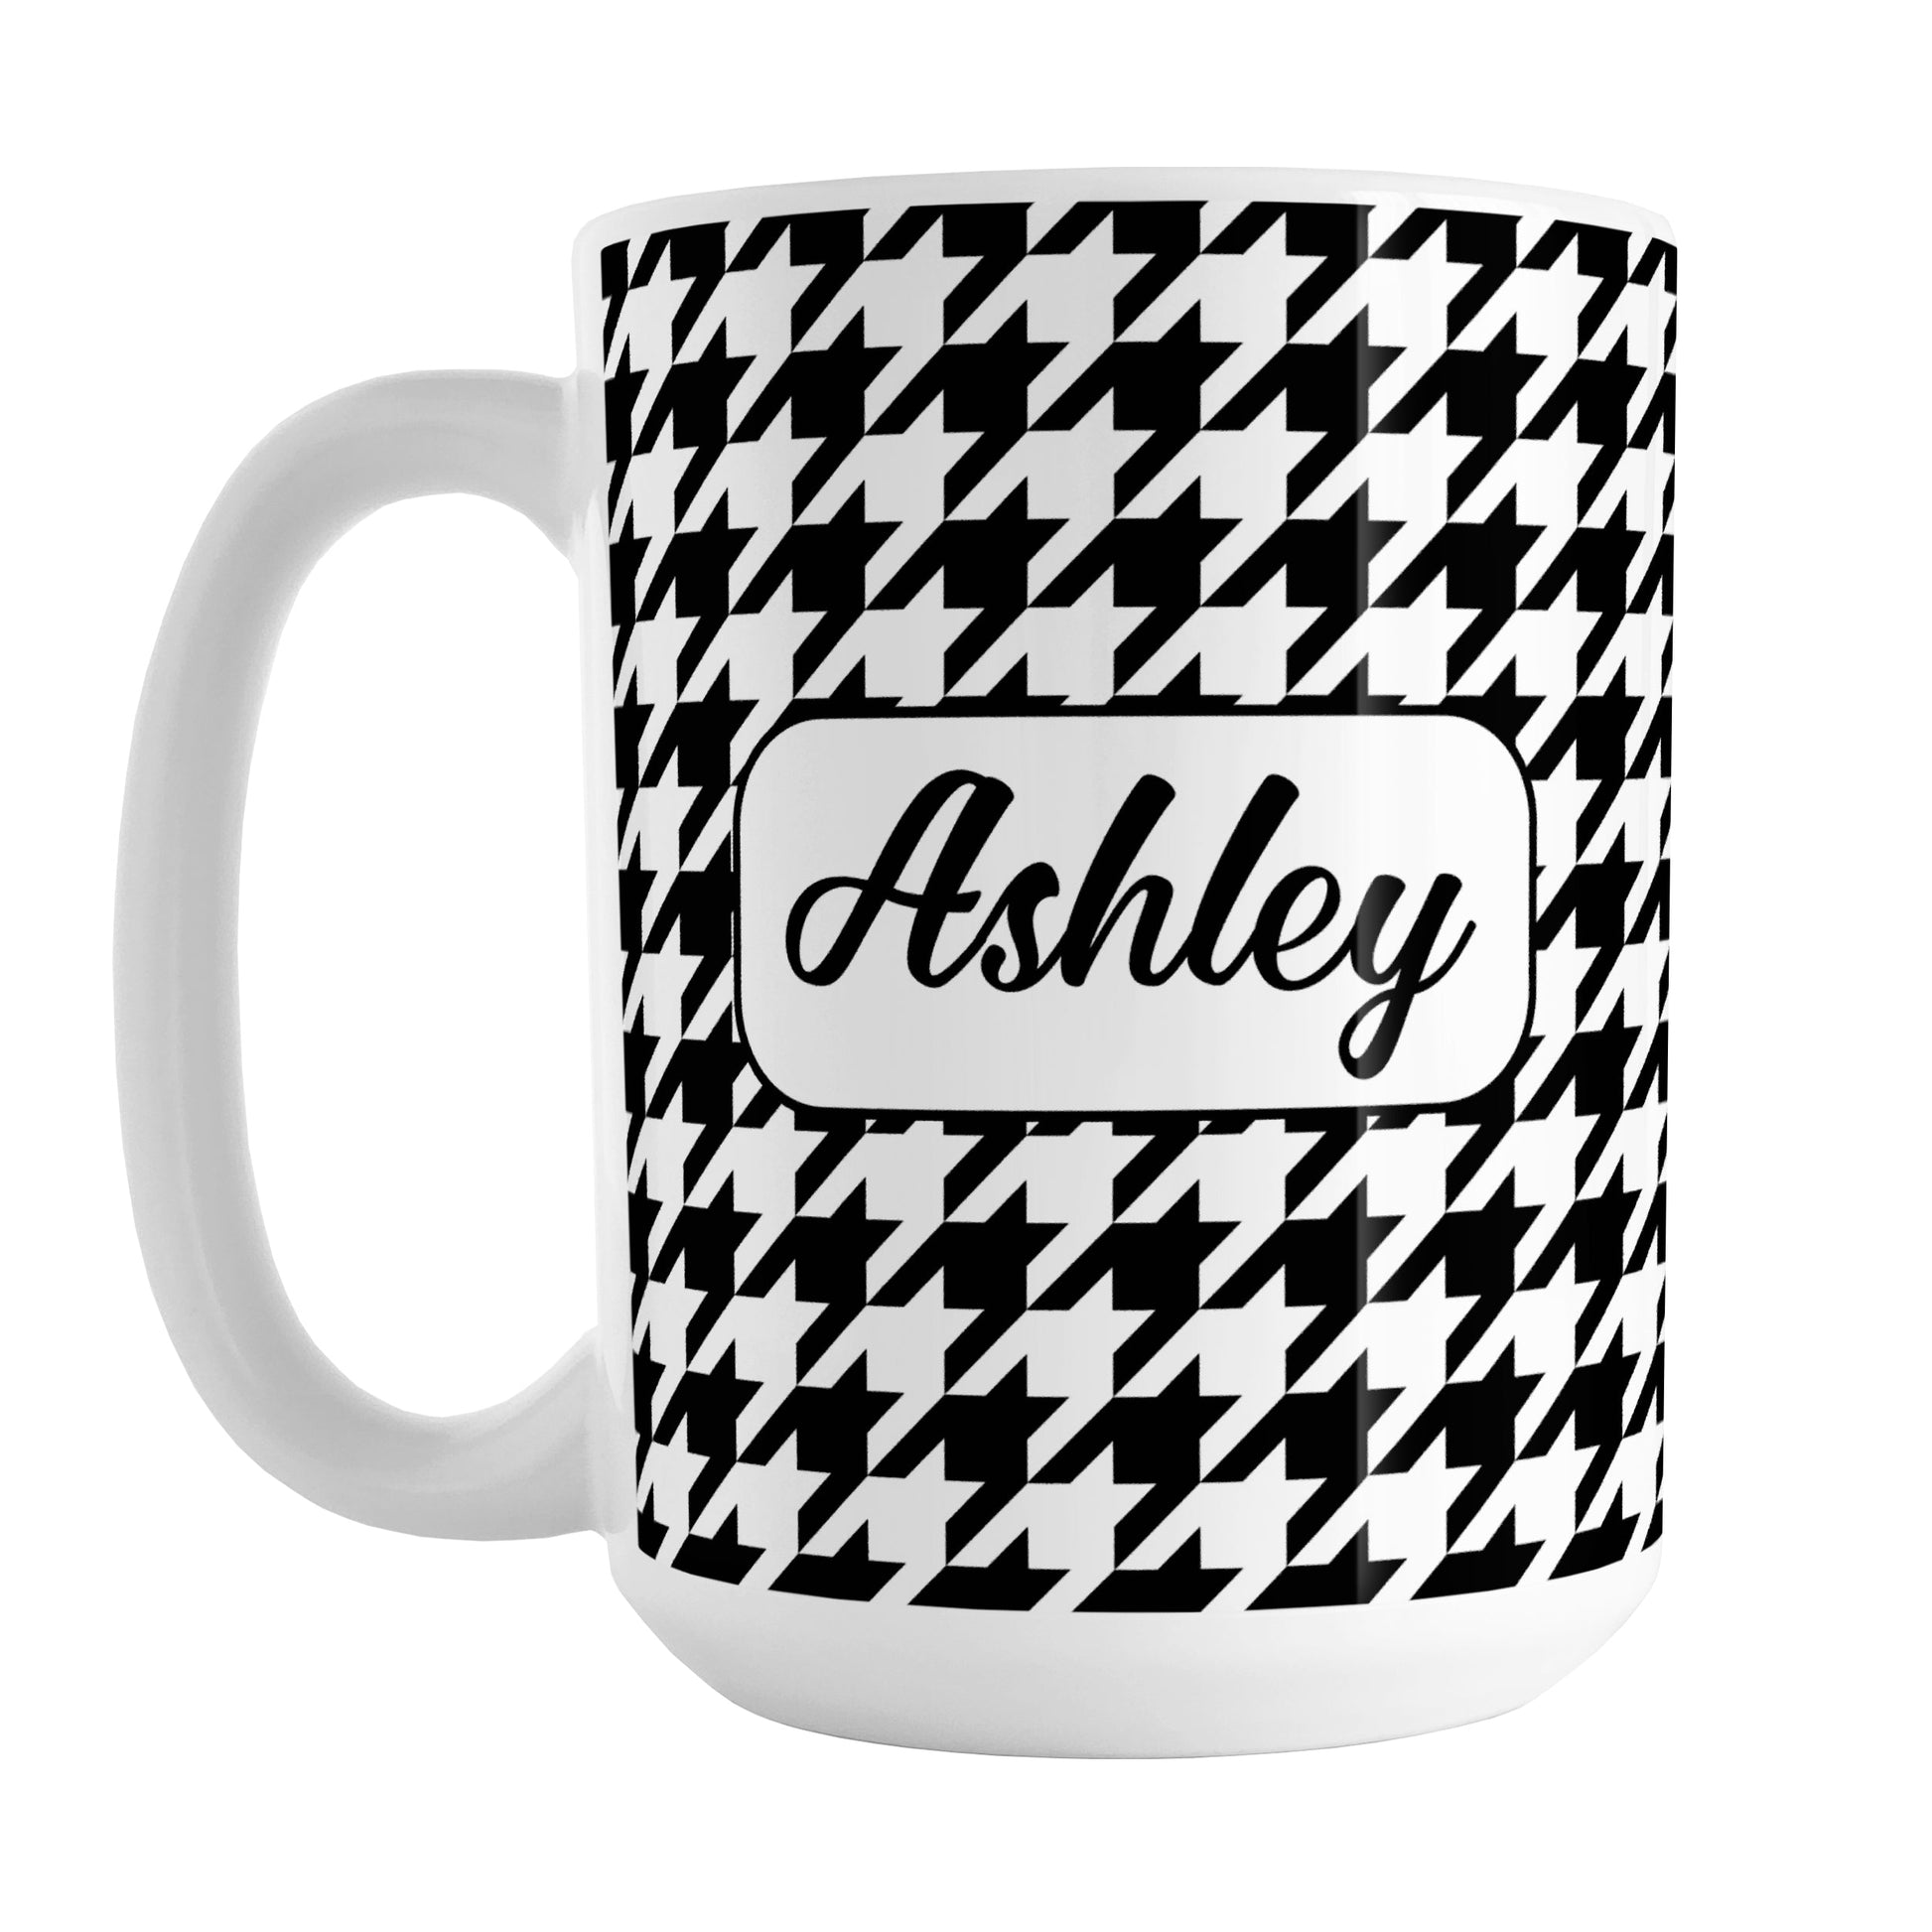 Personalized Black and White Houndstooth Mug (15oz) at Amy's Coffee Mugs